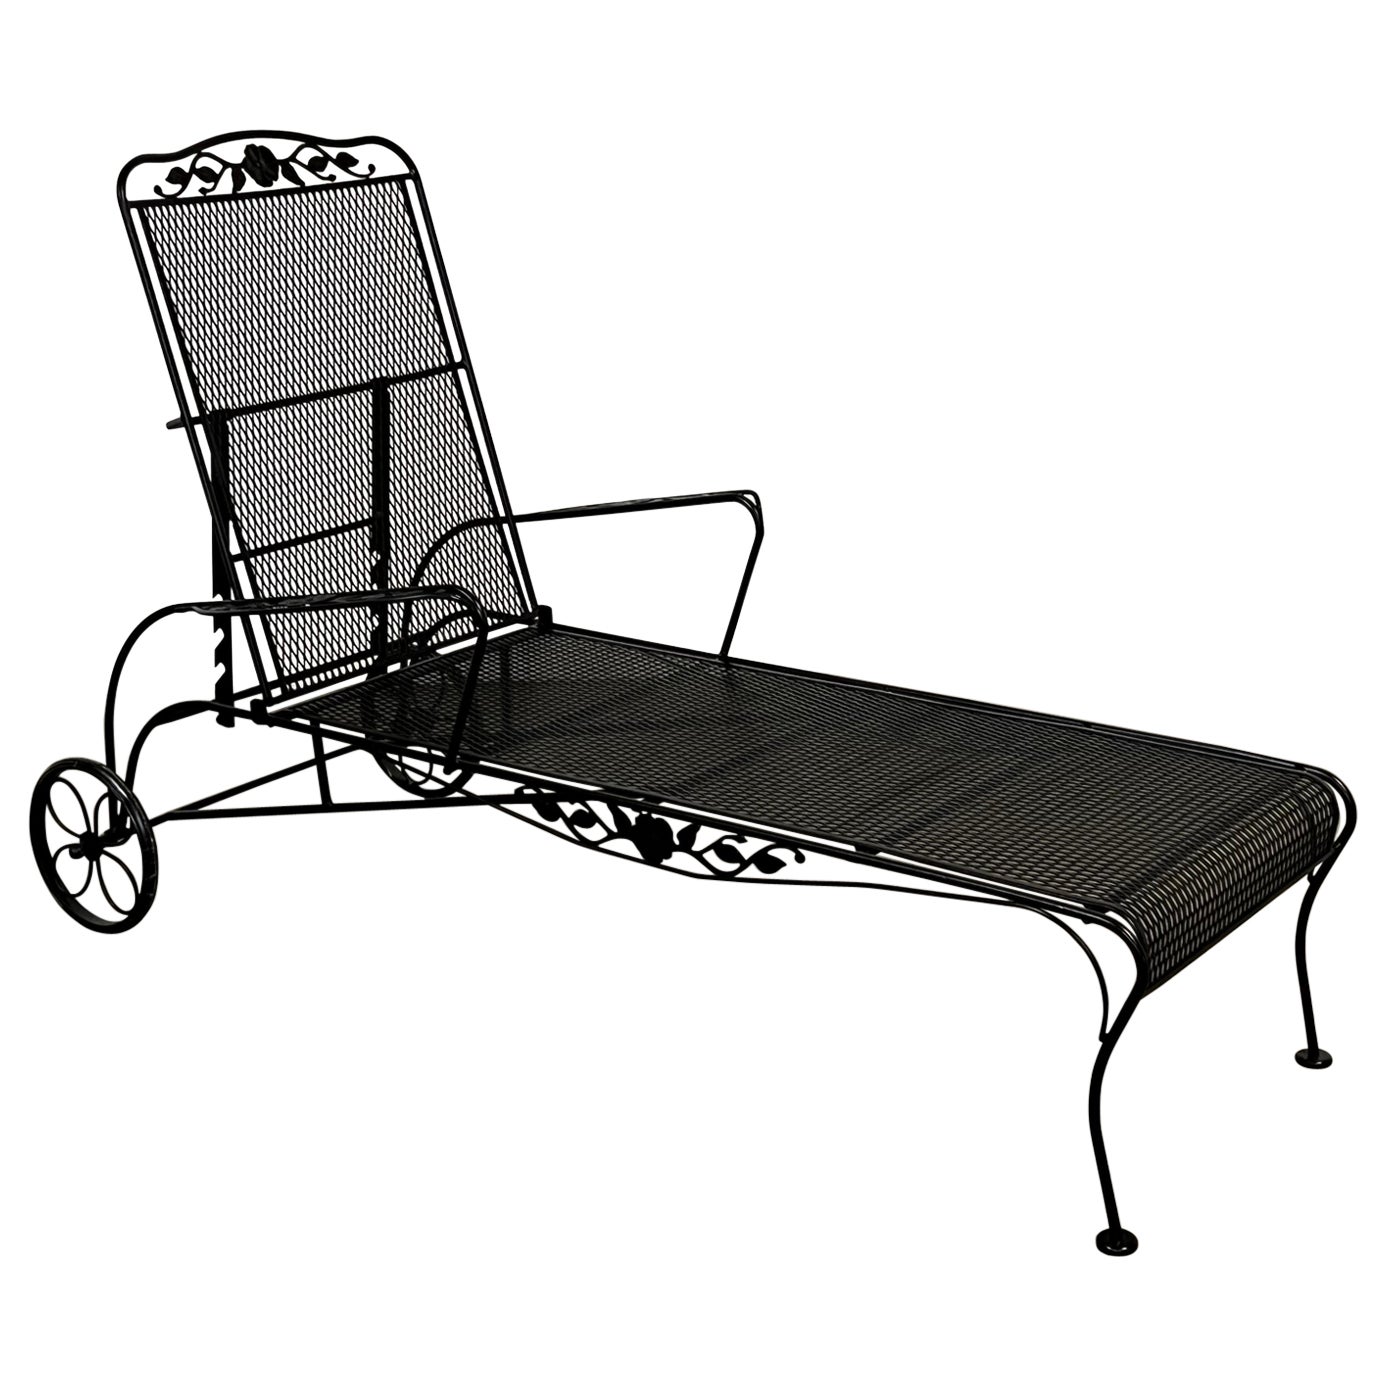  Woodard Style Outdoor Iron Chaise Lounge Chair For Sale